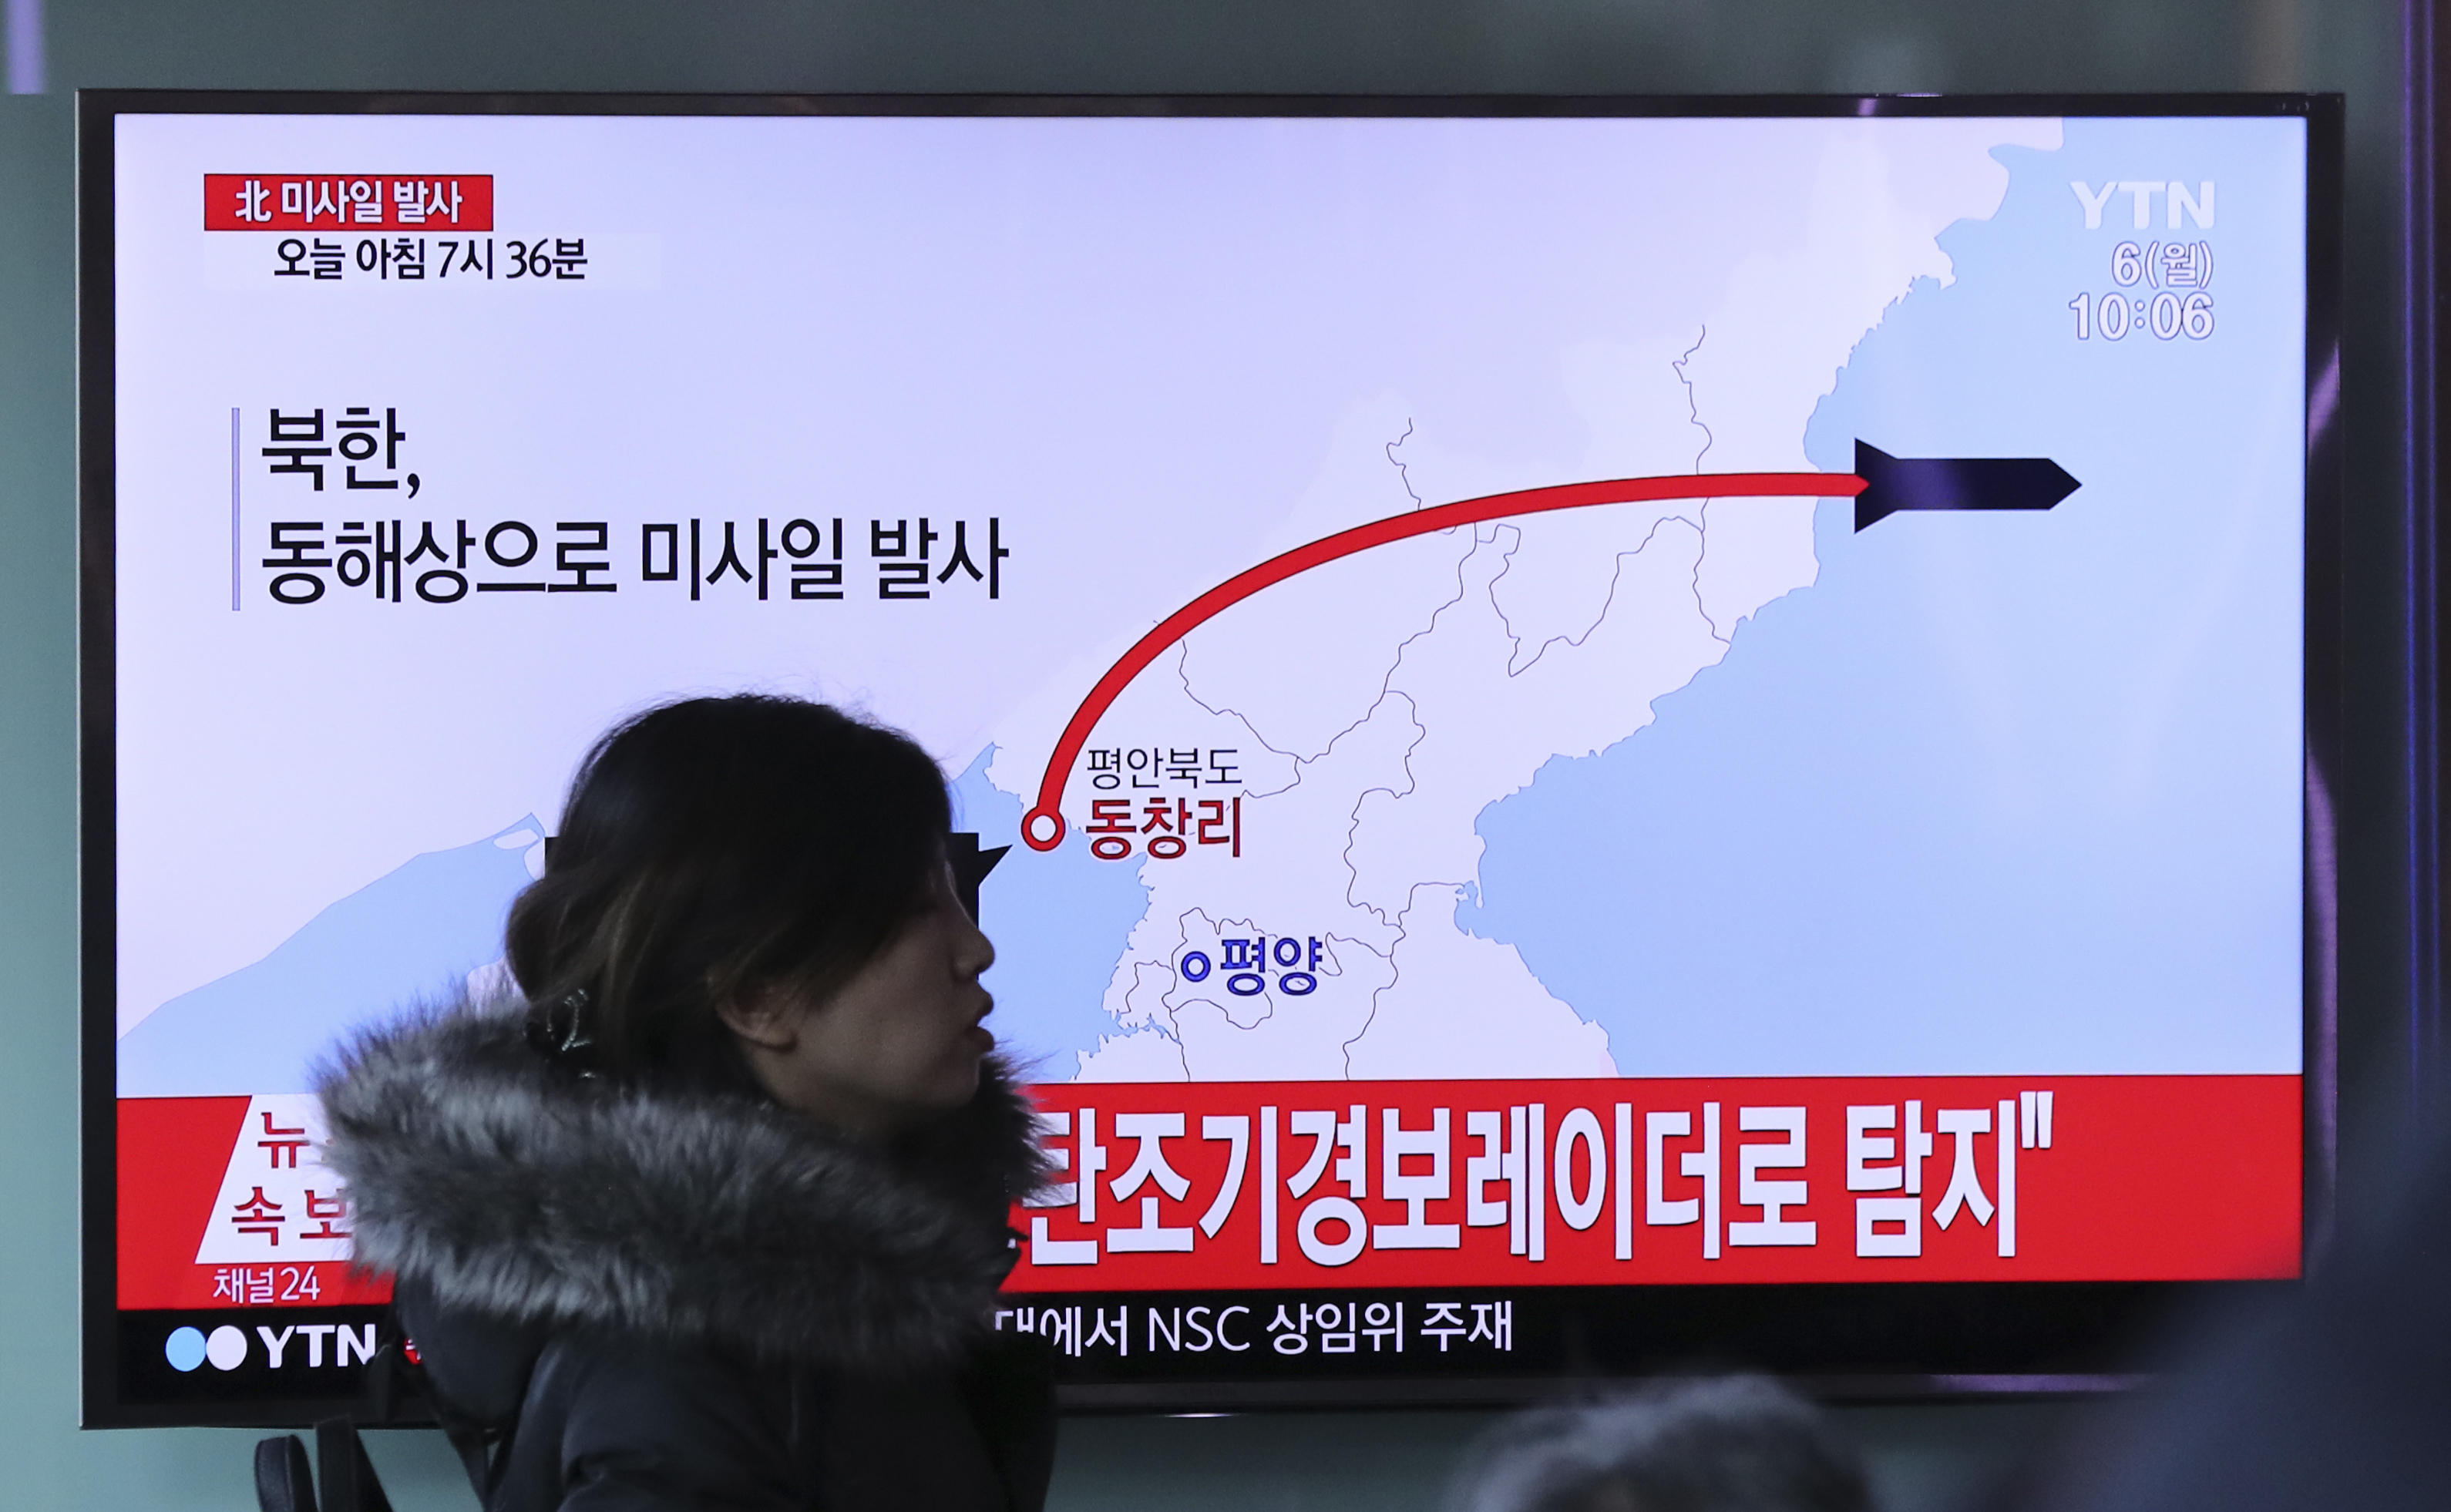 In this March 6, 2017 file photo, a TV screen shows a report about North Korea's missile firing, at Seoul Train Station in South Korea. (Lee Jin-man—AP)